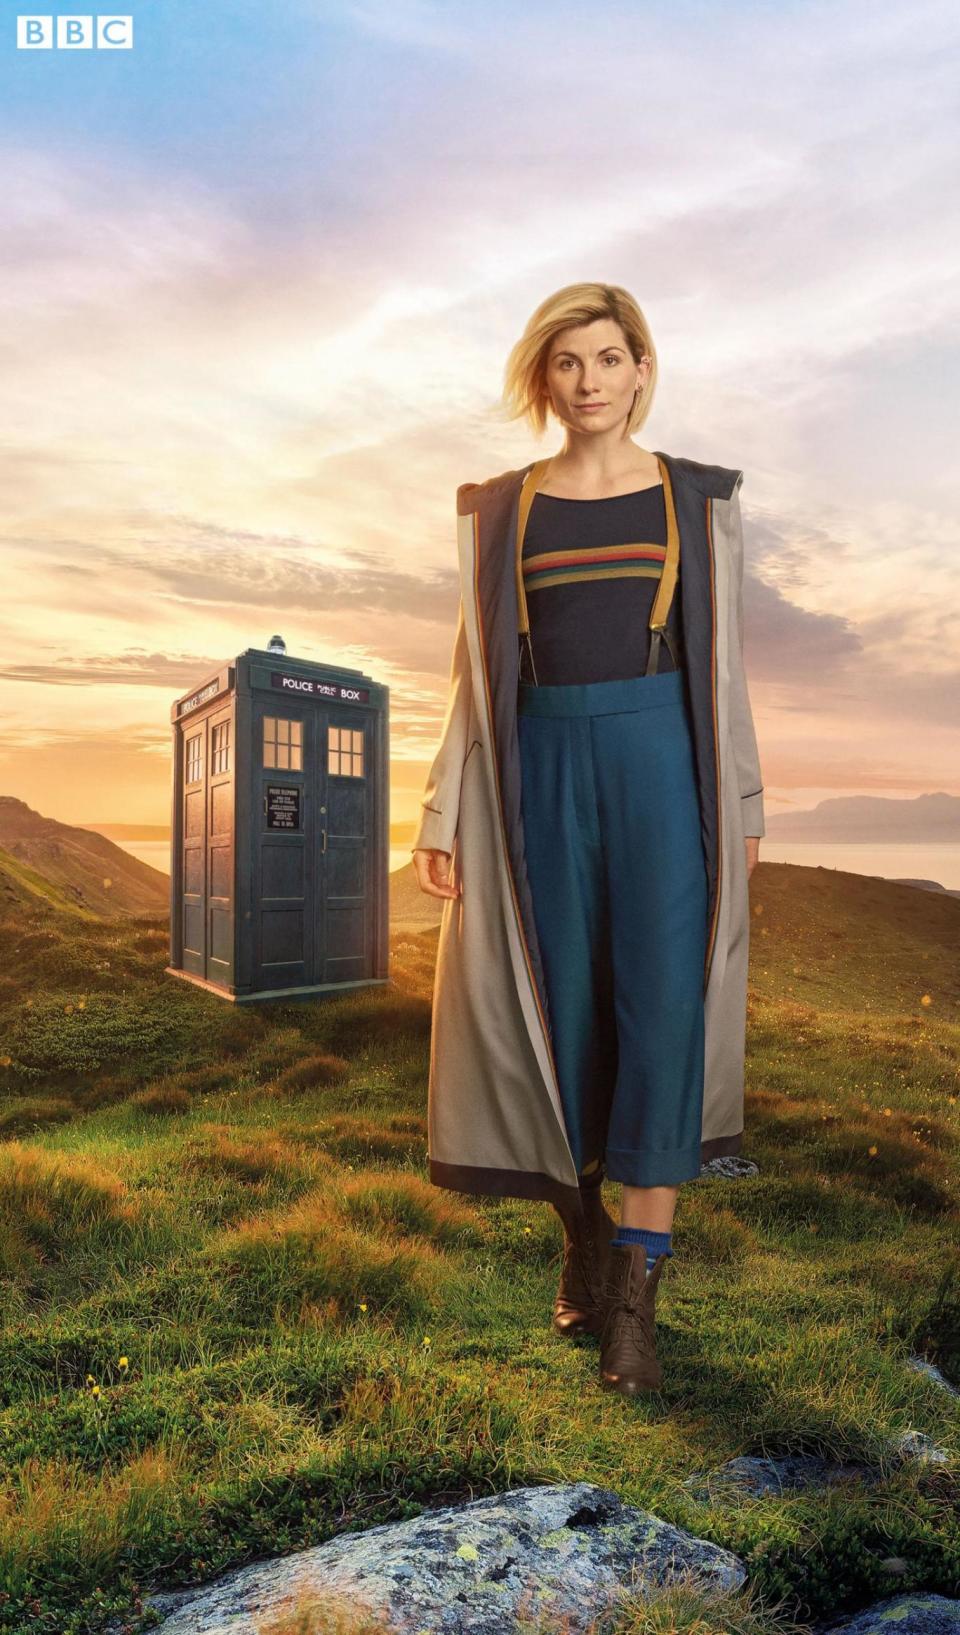 Brand new Doctor Who logo revealed ahead of Jodie Whittaker’s turn in the tardis